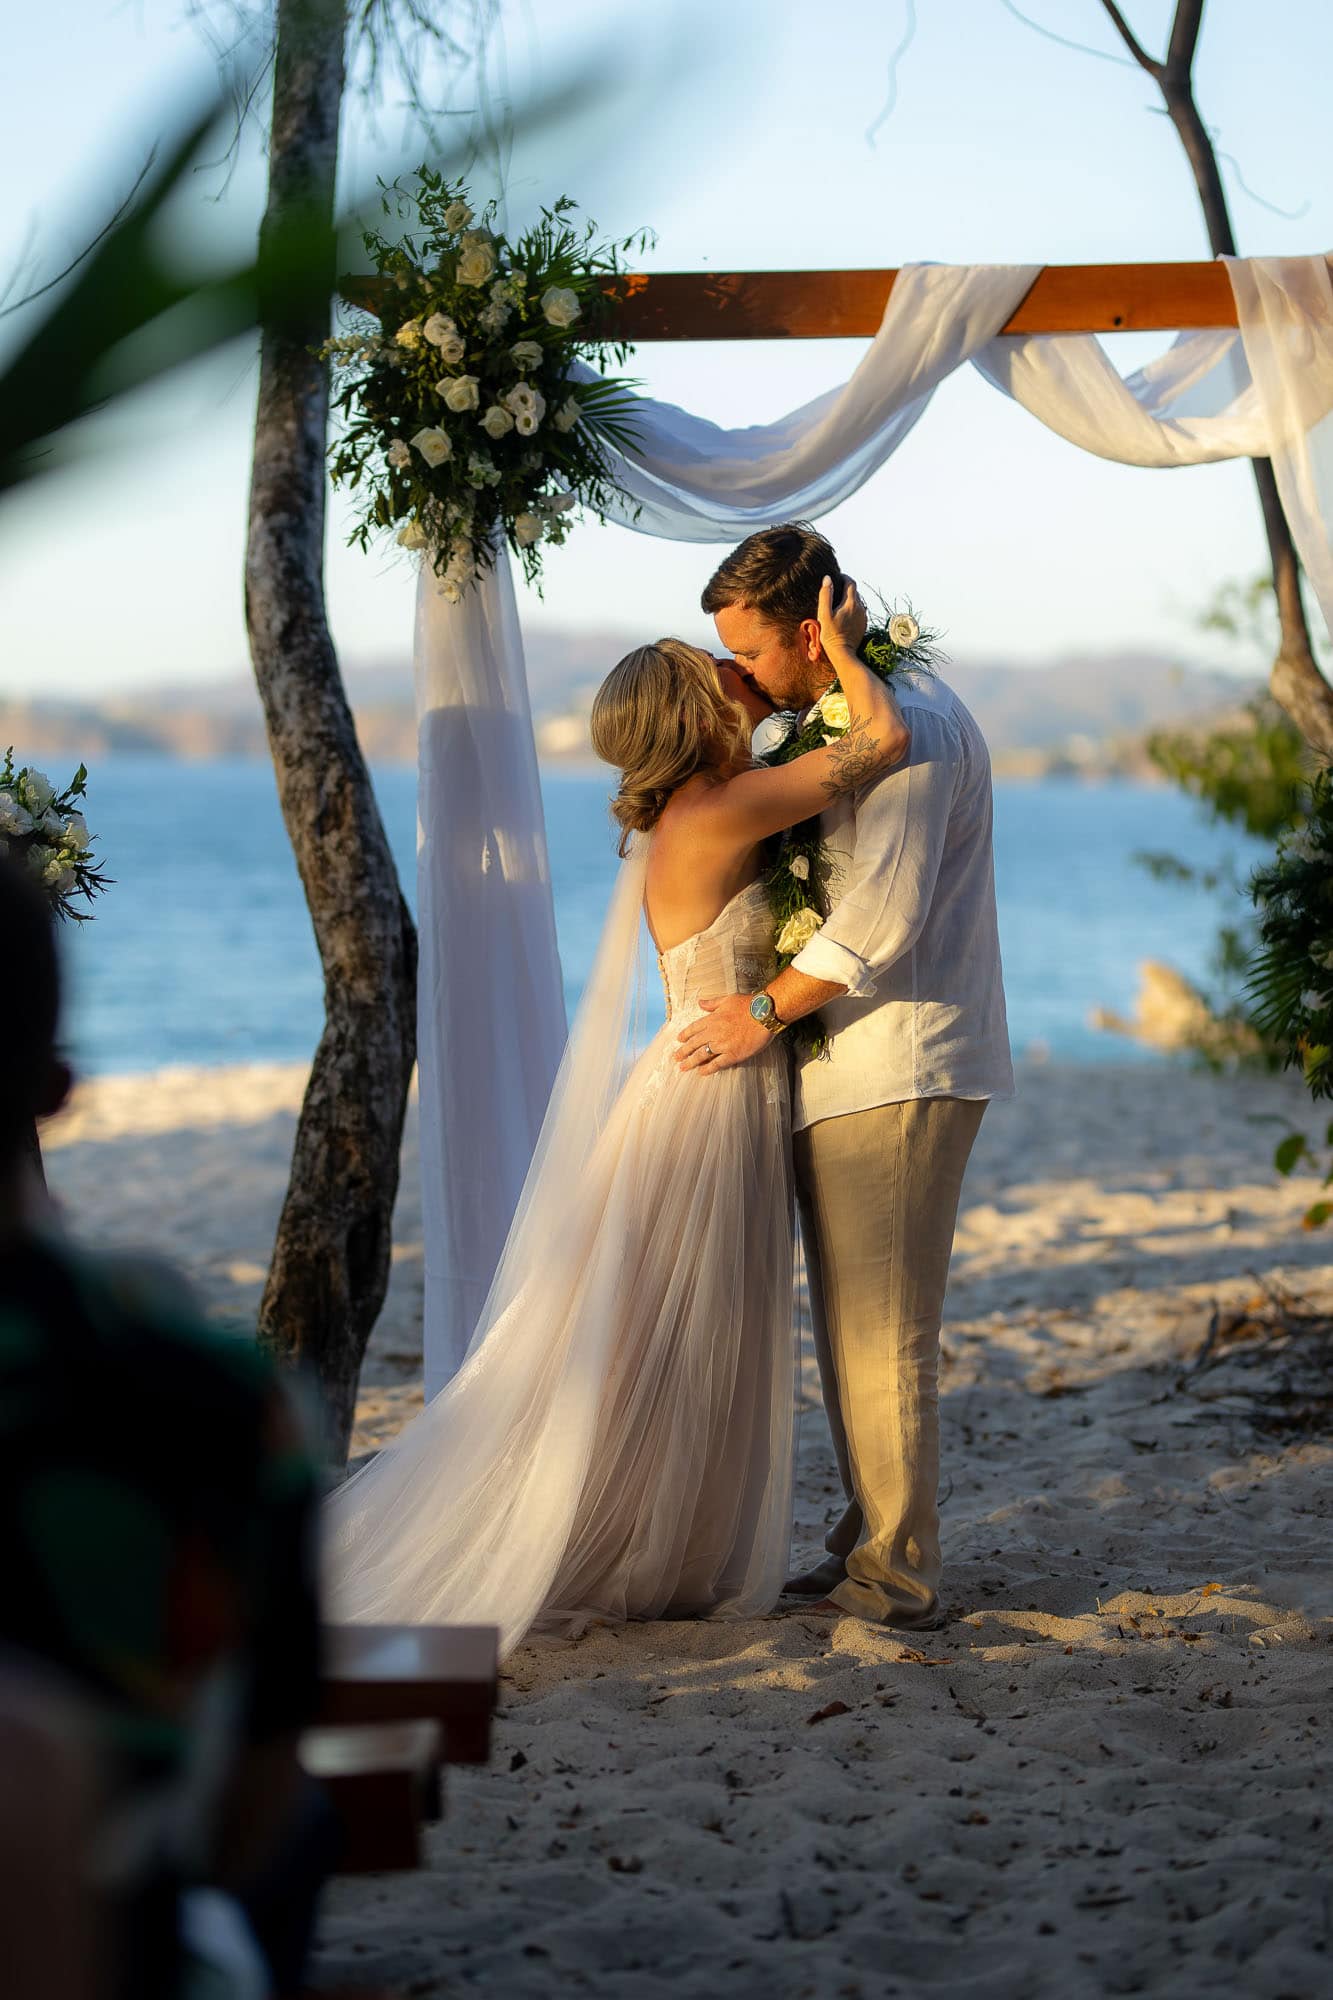 first kiss at beach wedding at w hotel - reserva conchal